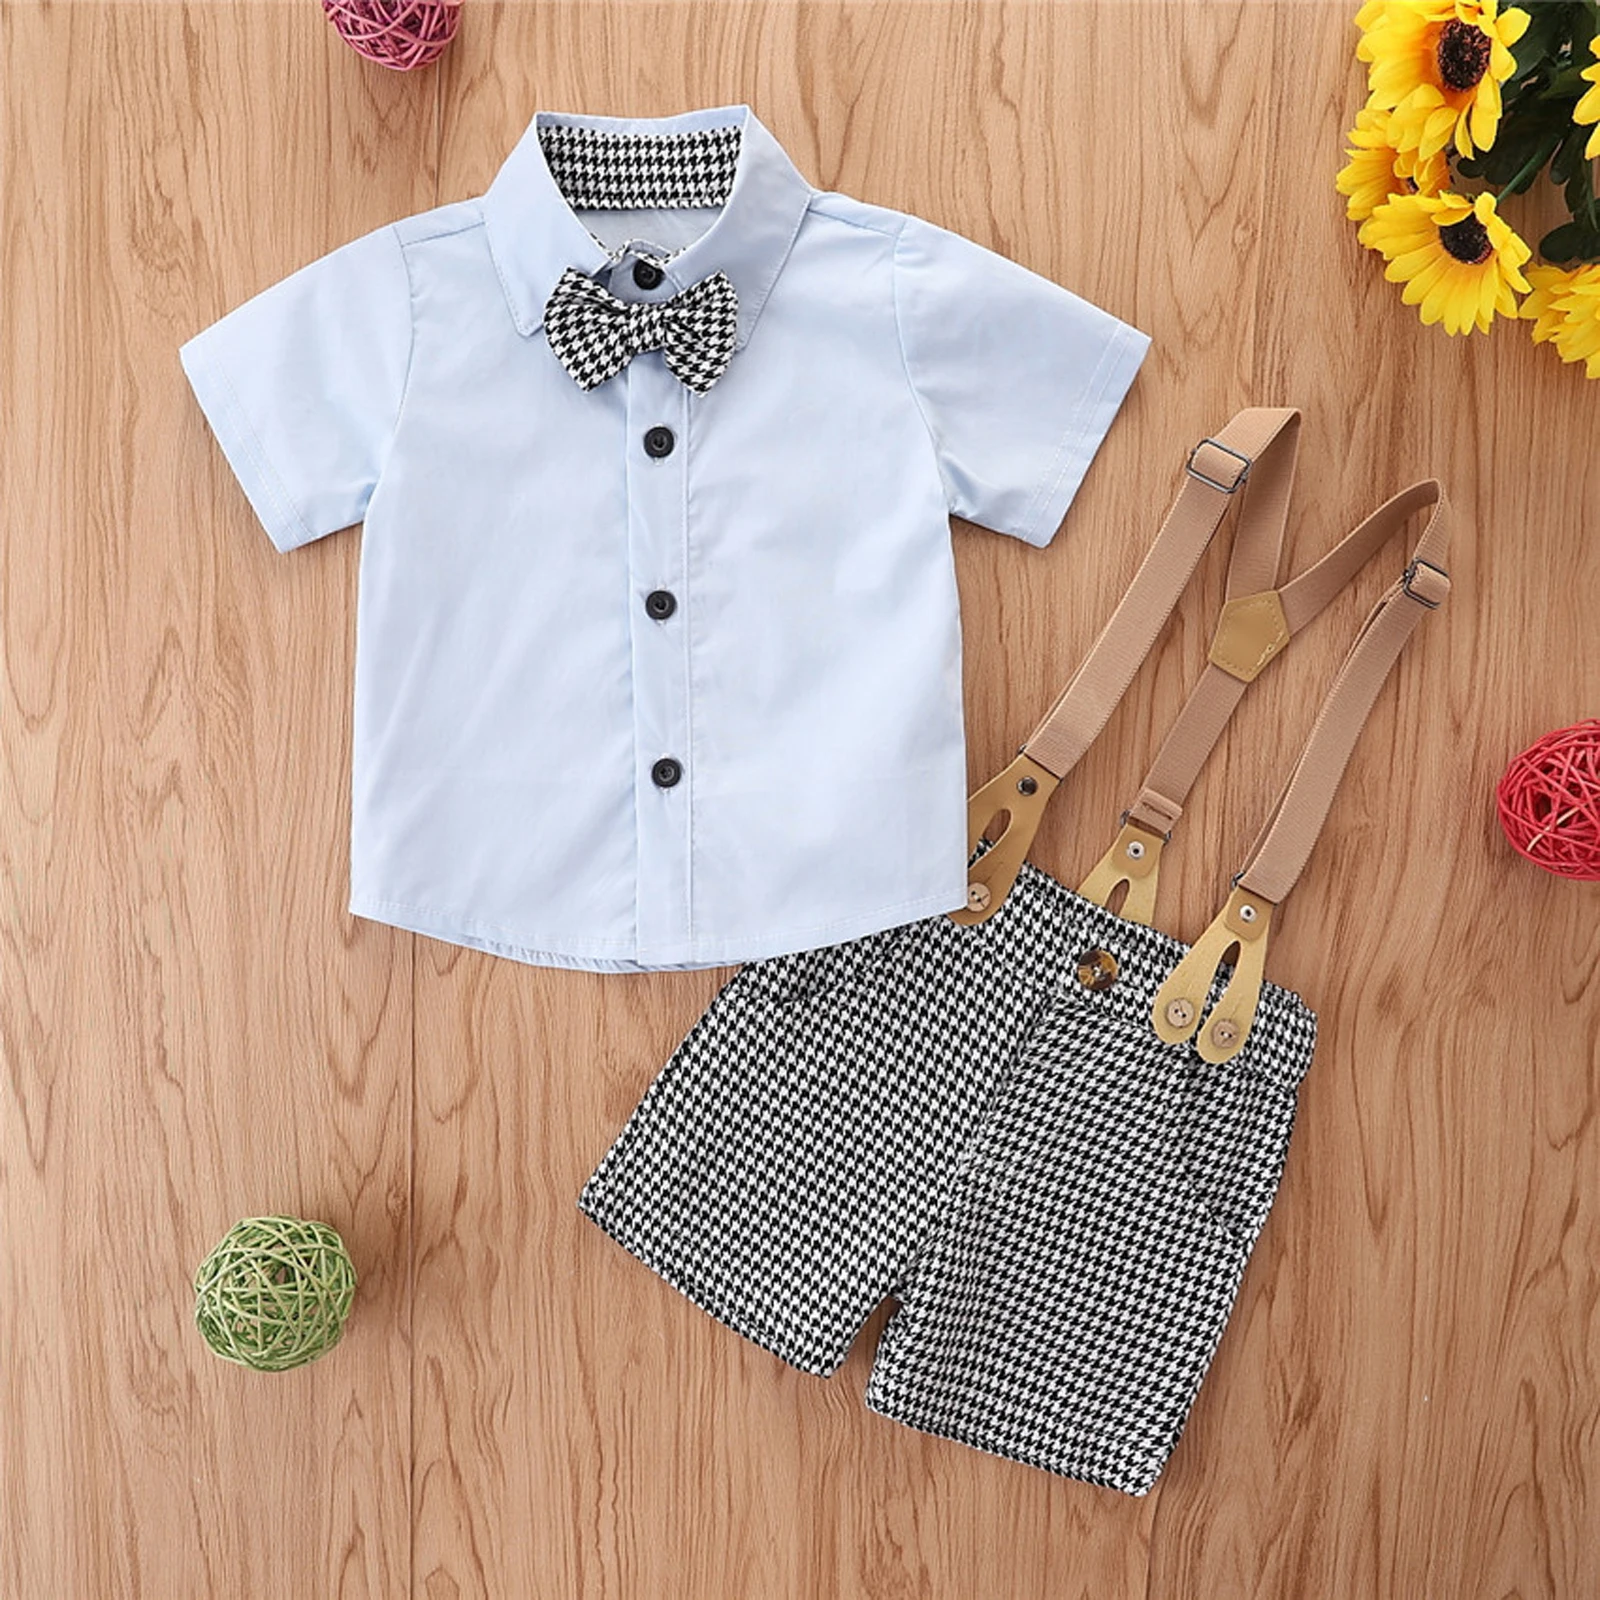 

2Pcs Baby Houndstooth Print Outfits Baby Boy Button Down Short Sleeve Lapel Bowknot Shirt + Suspender Pants With Pocket 12M-4T